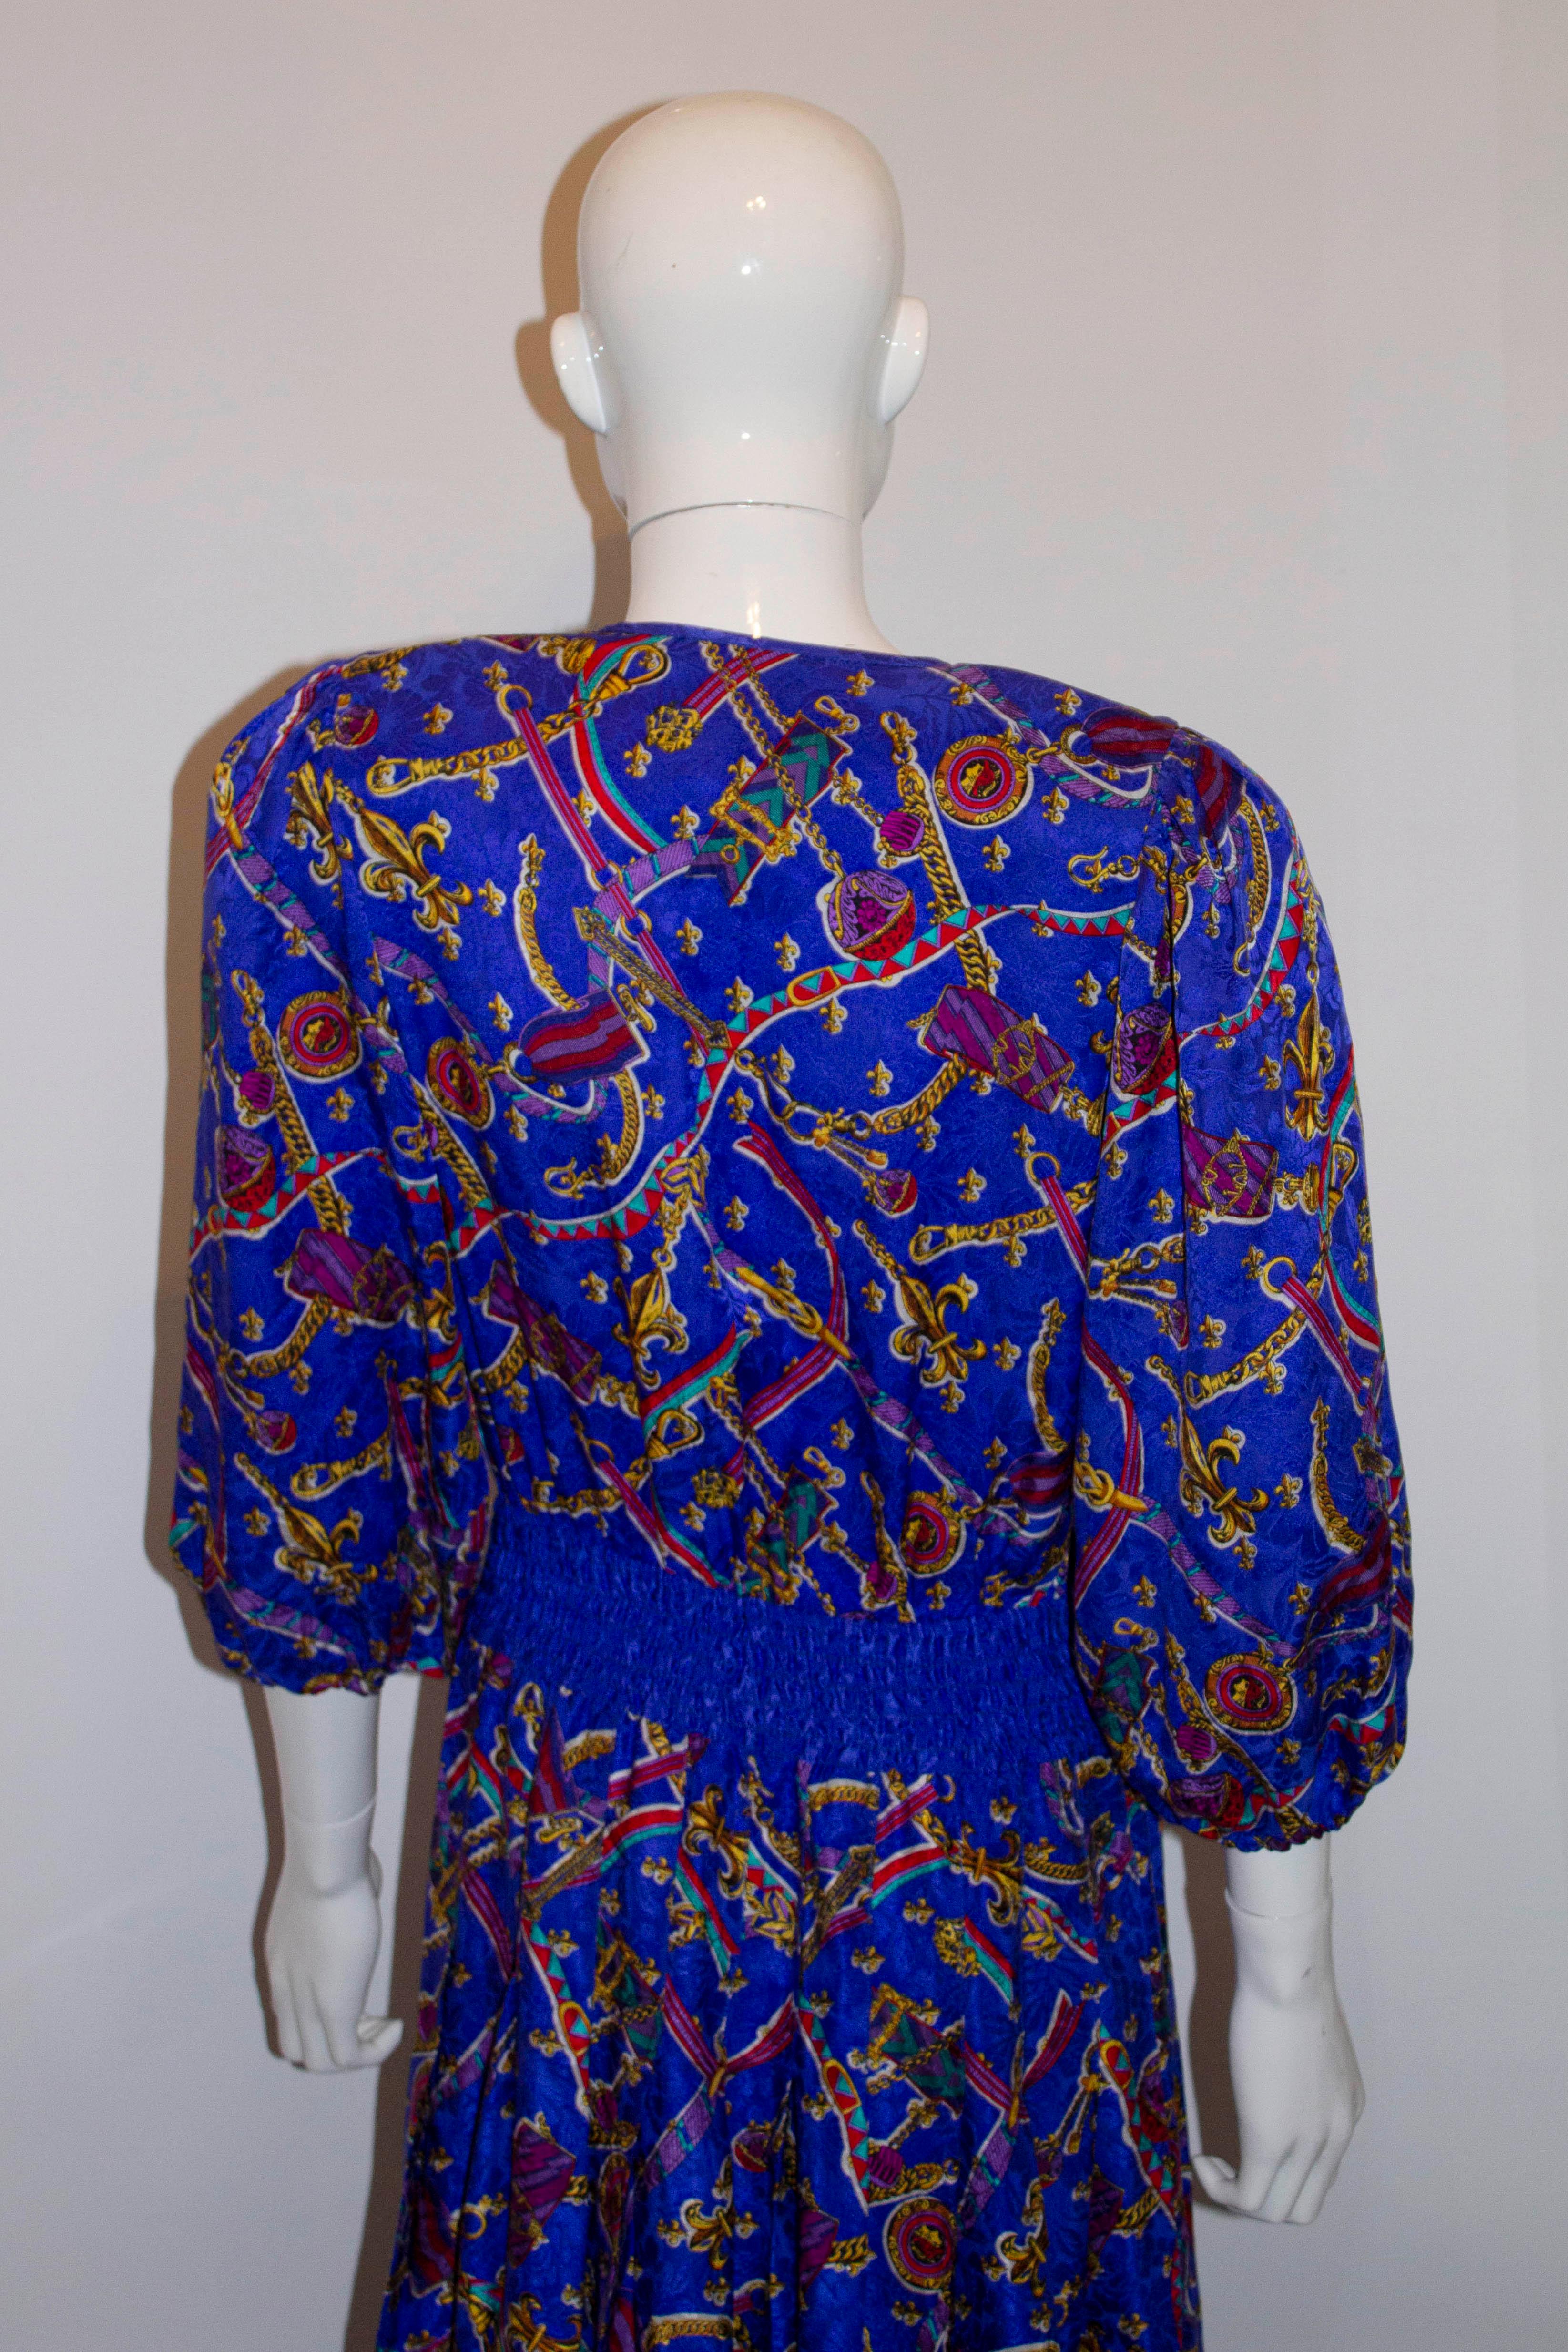 A pretty vintage silk dress by Diane Freis, petite range. The dress has a blue background with a chain print. It has an elasticated waist with a button opening at the front. There are pleats that start 5''below waist leval producing a flattering 